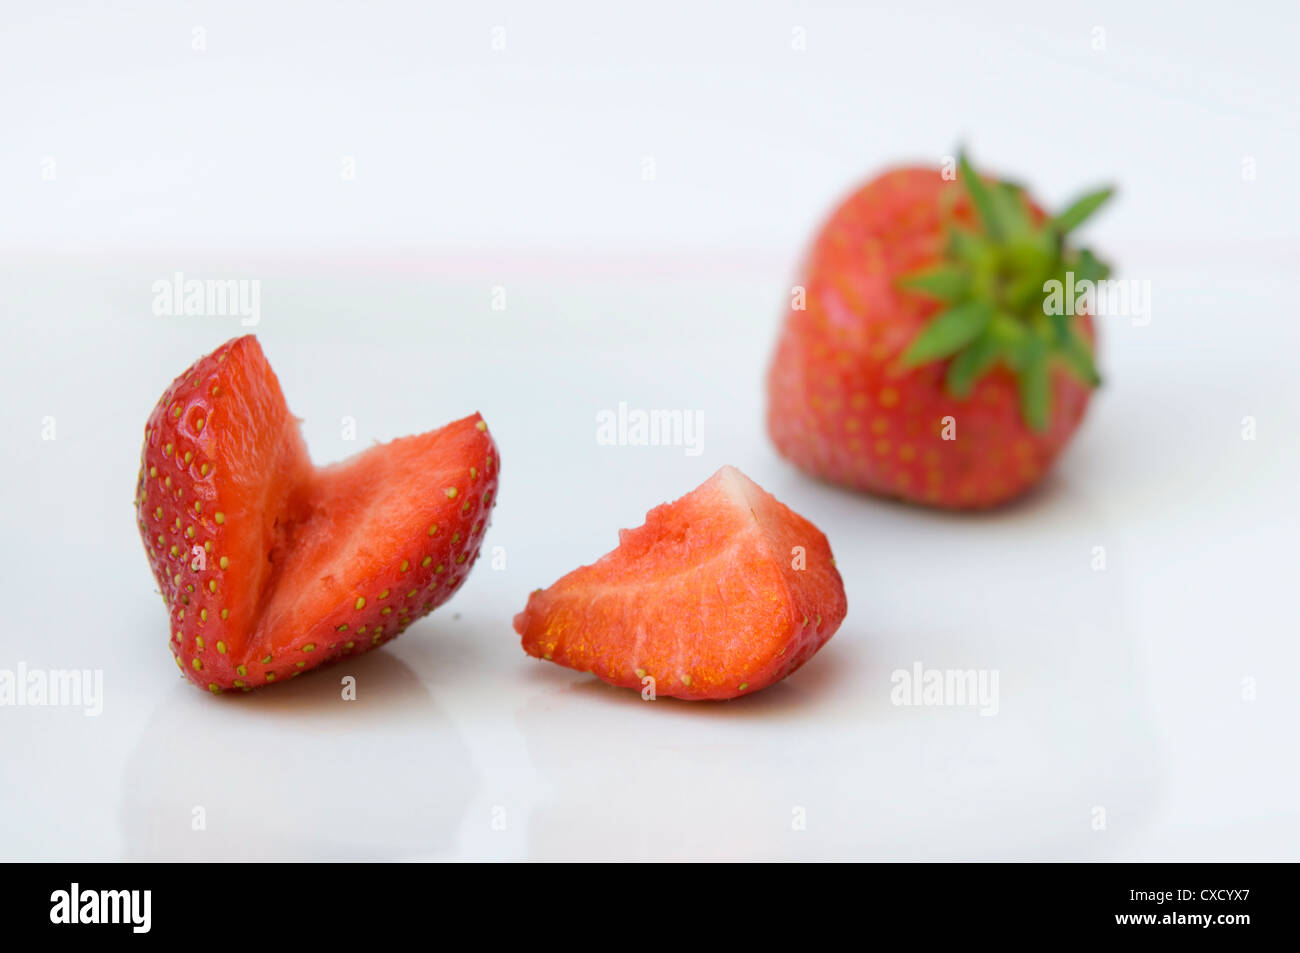 Strawberries on white plate, one of which is sliced Stock Photo